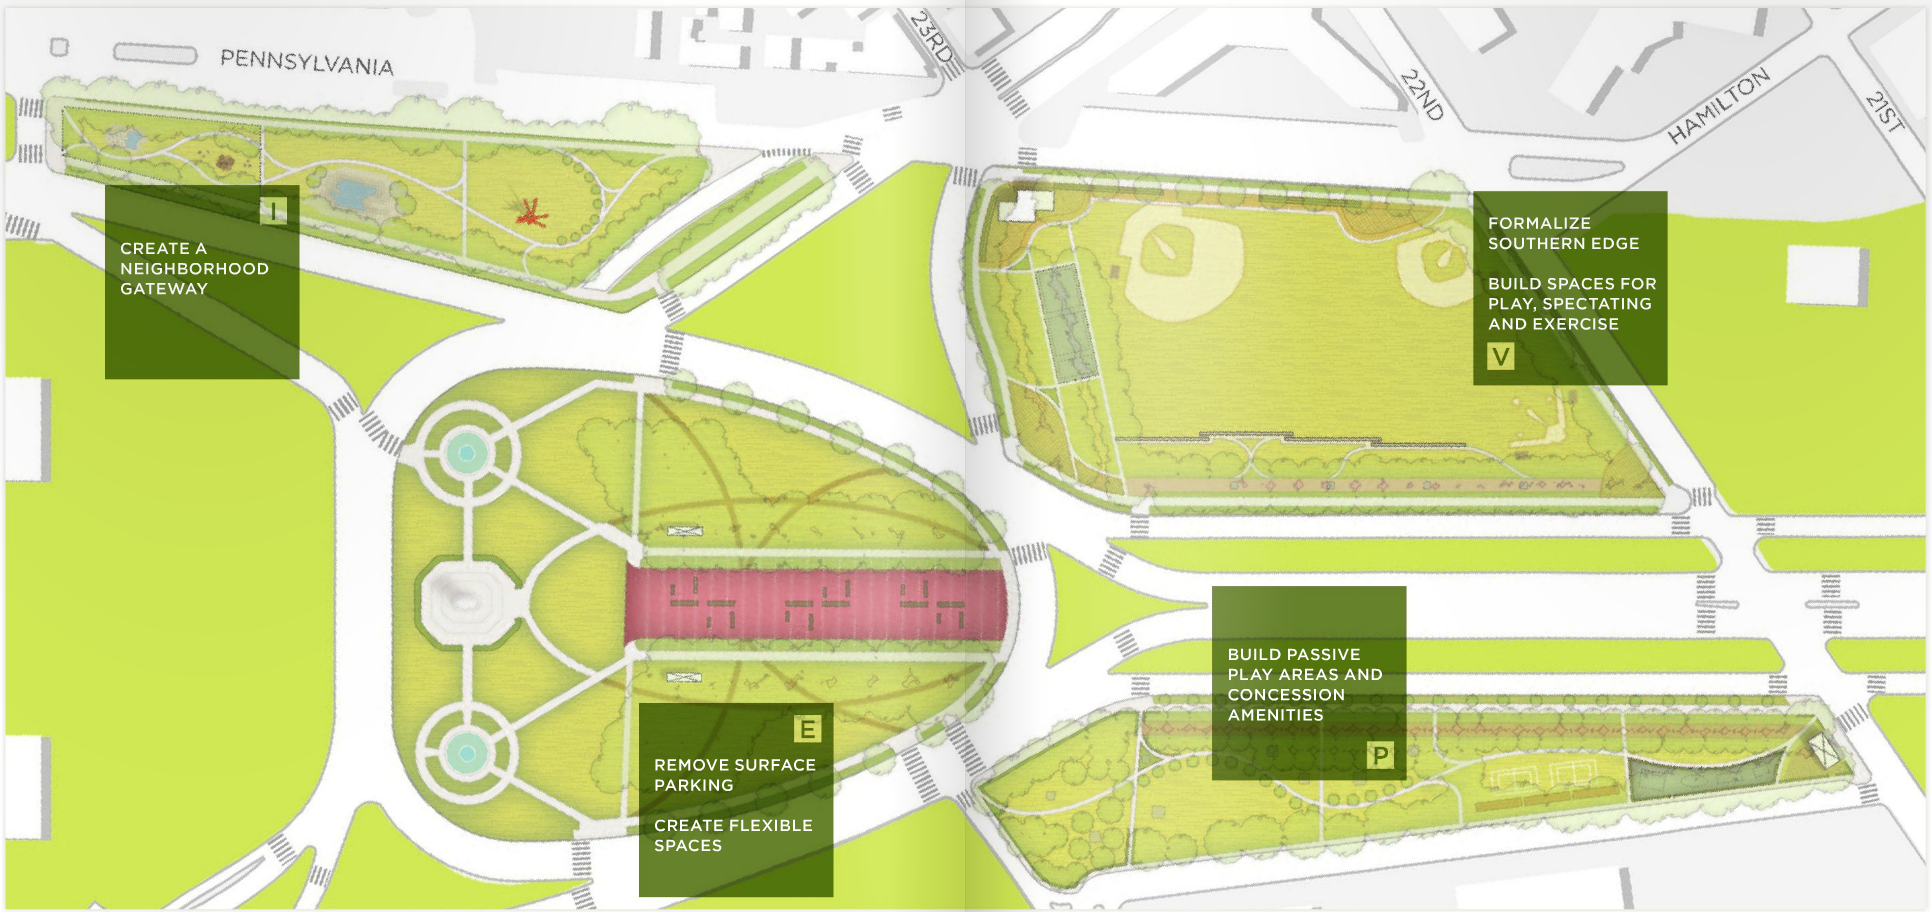 More Park, Less Way: Eakins Oval